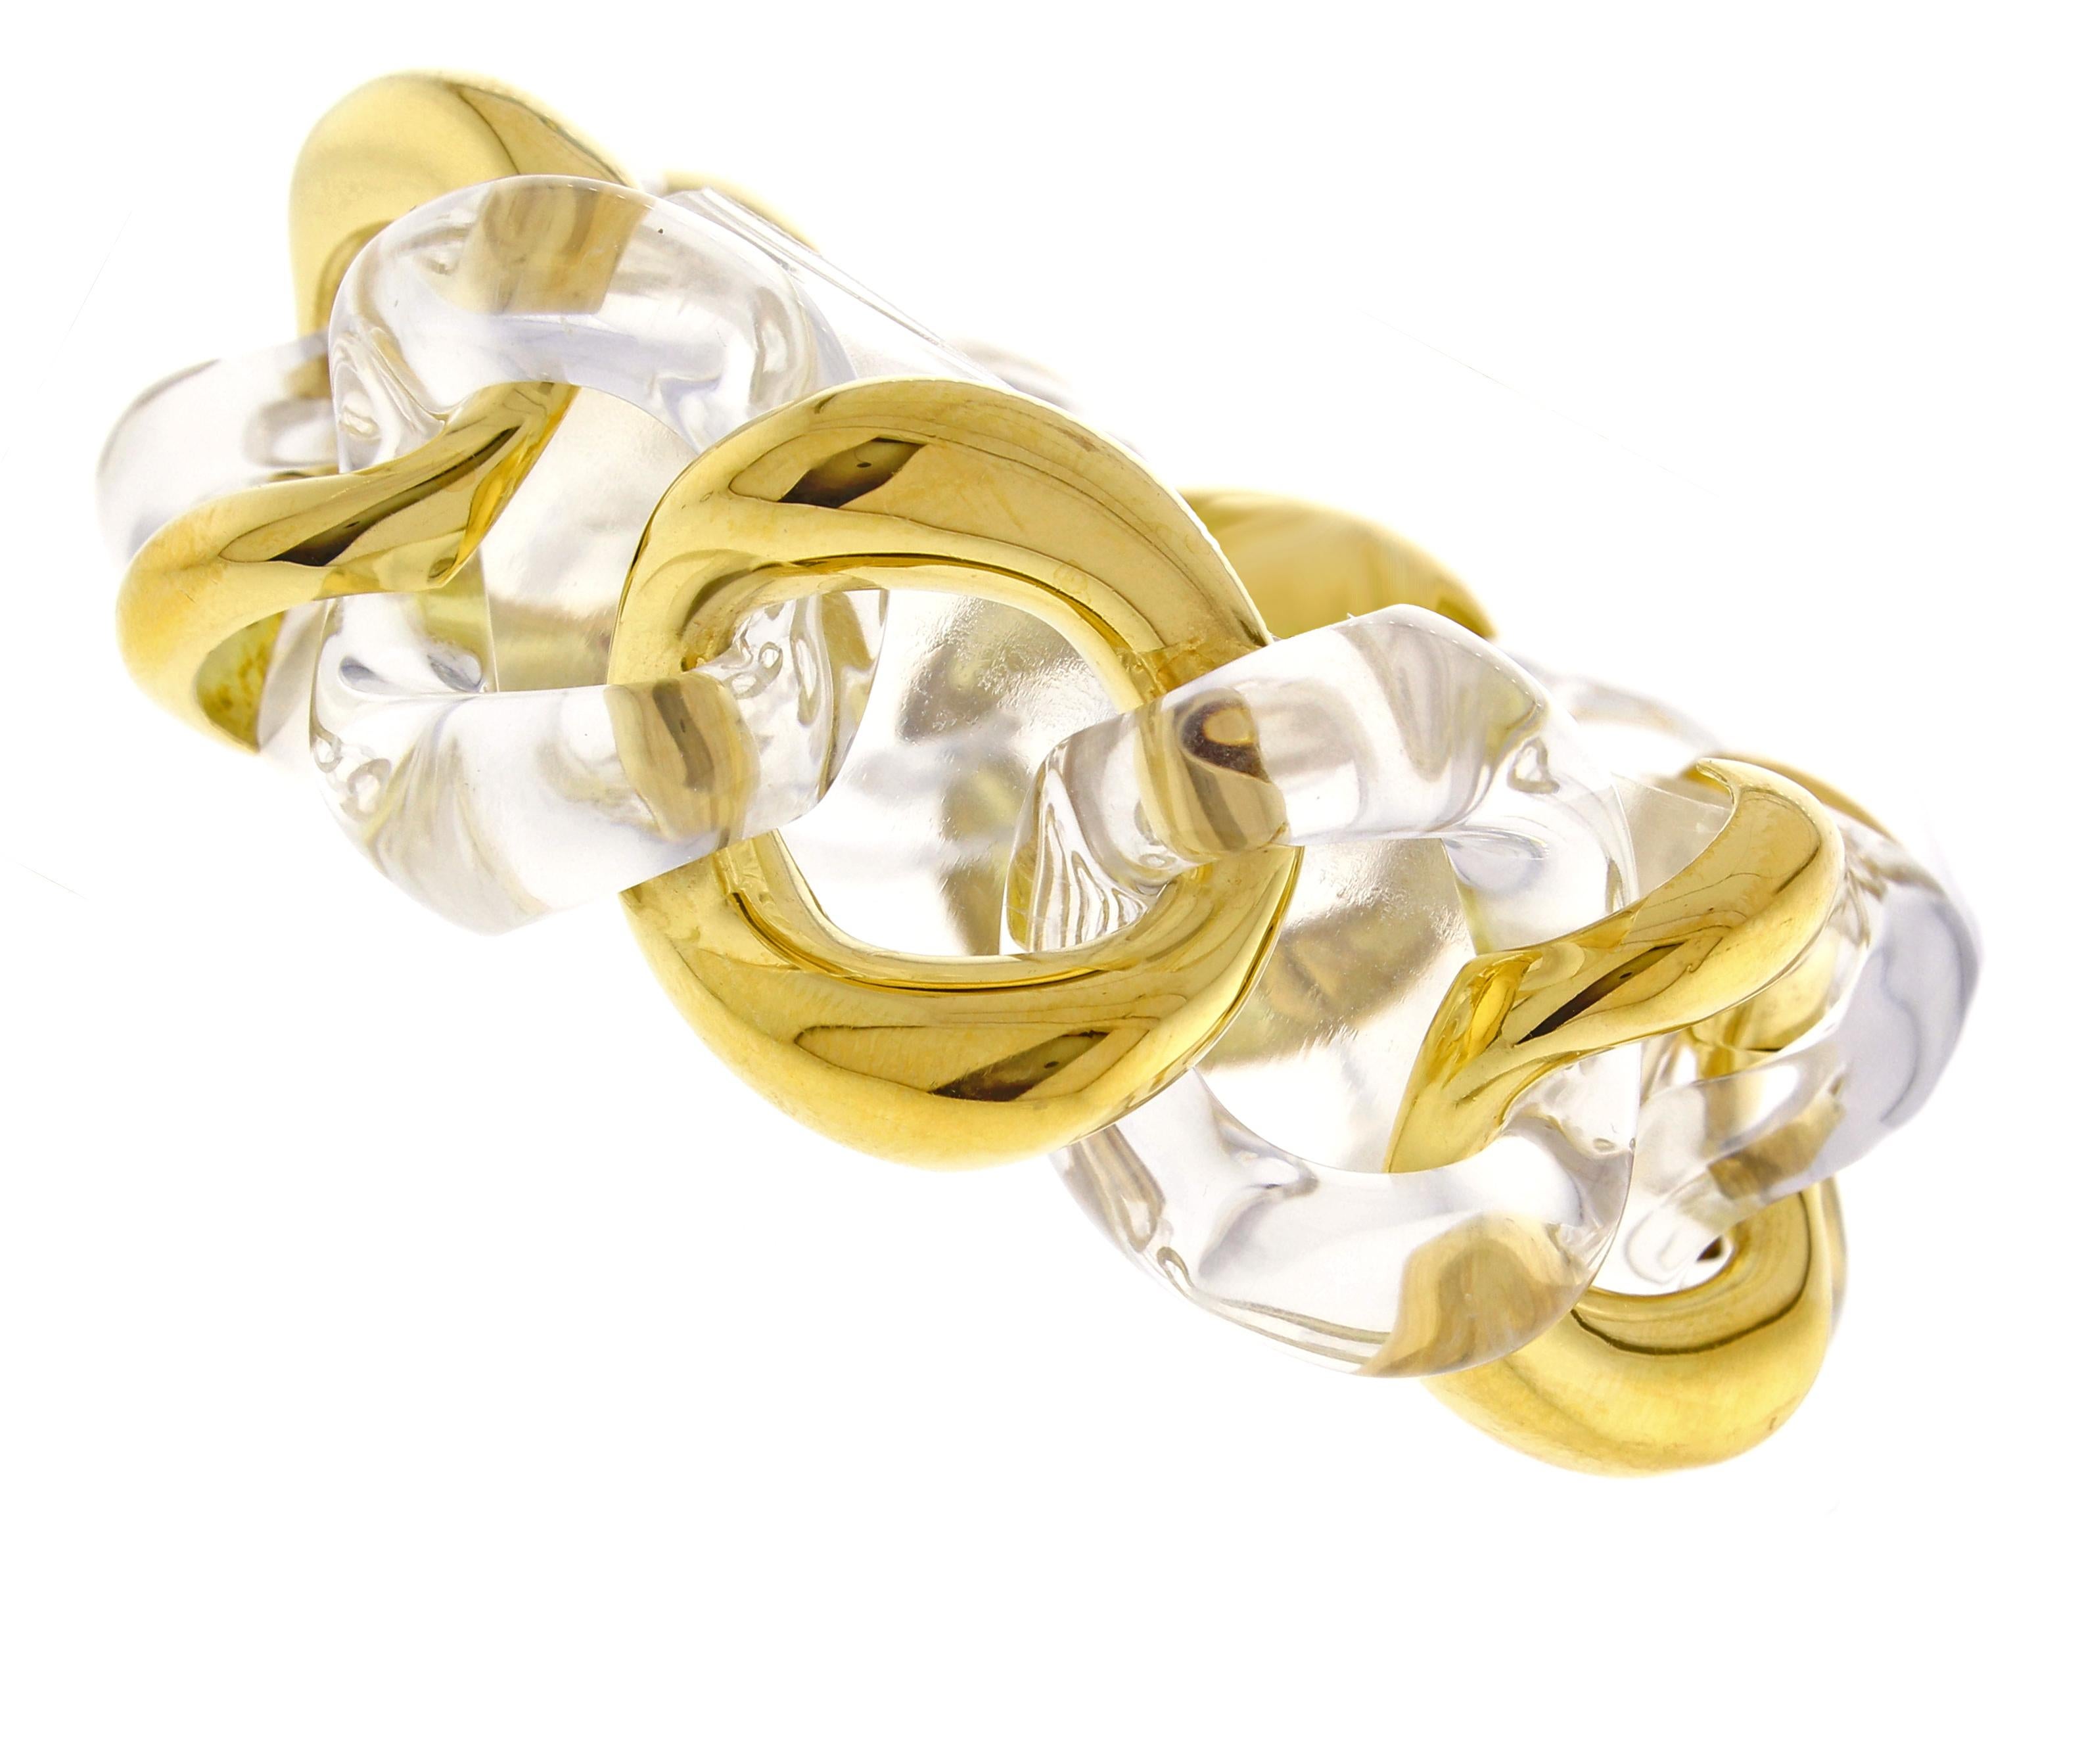 From Seaman Scheeps , carved rock crystal and 18 karat yellow gold classic link bracelet. Medium link size.  7.5